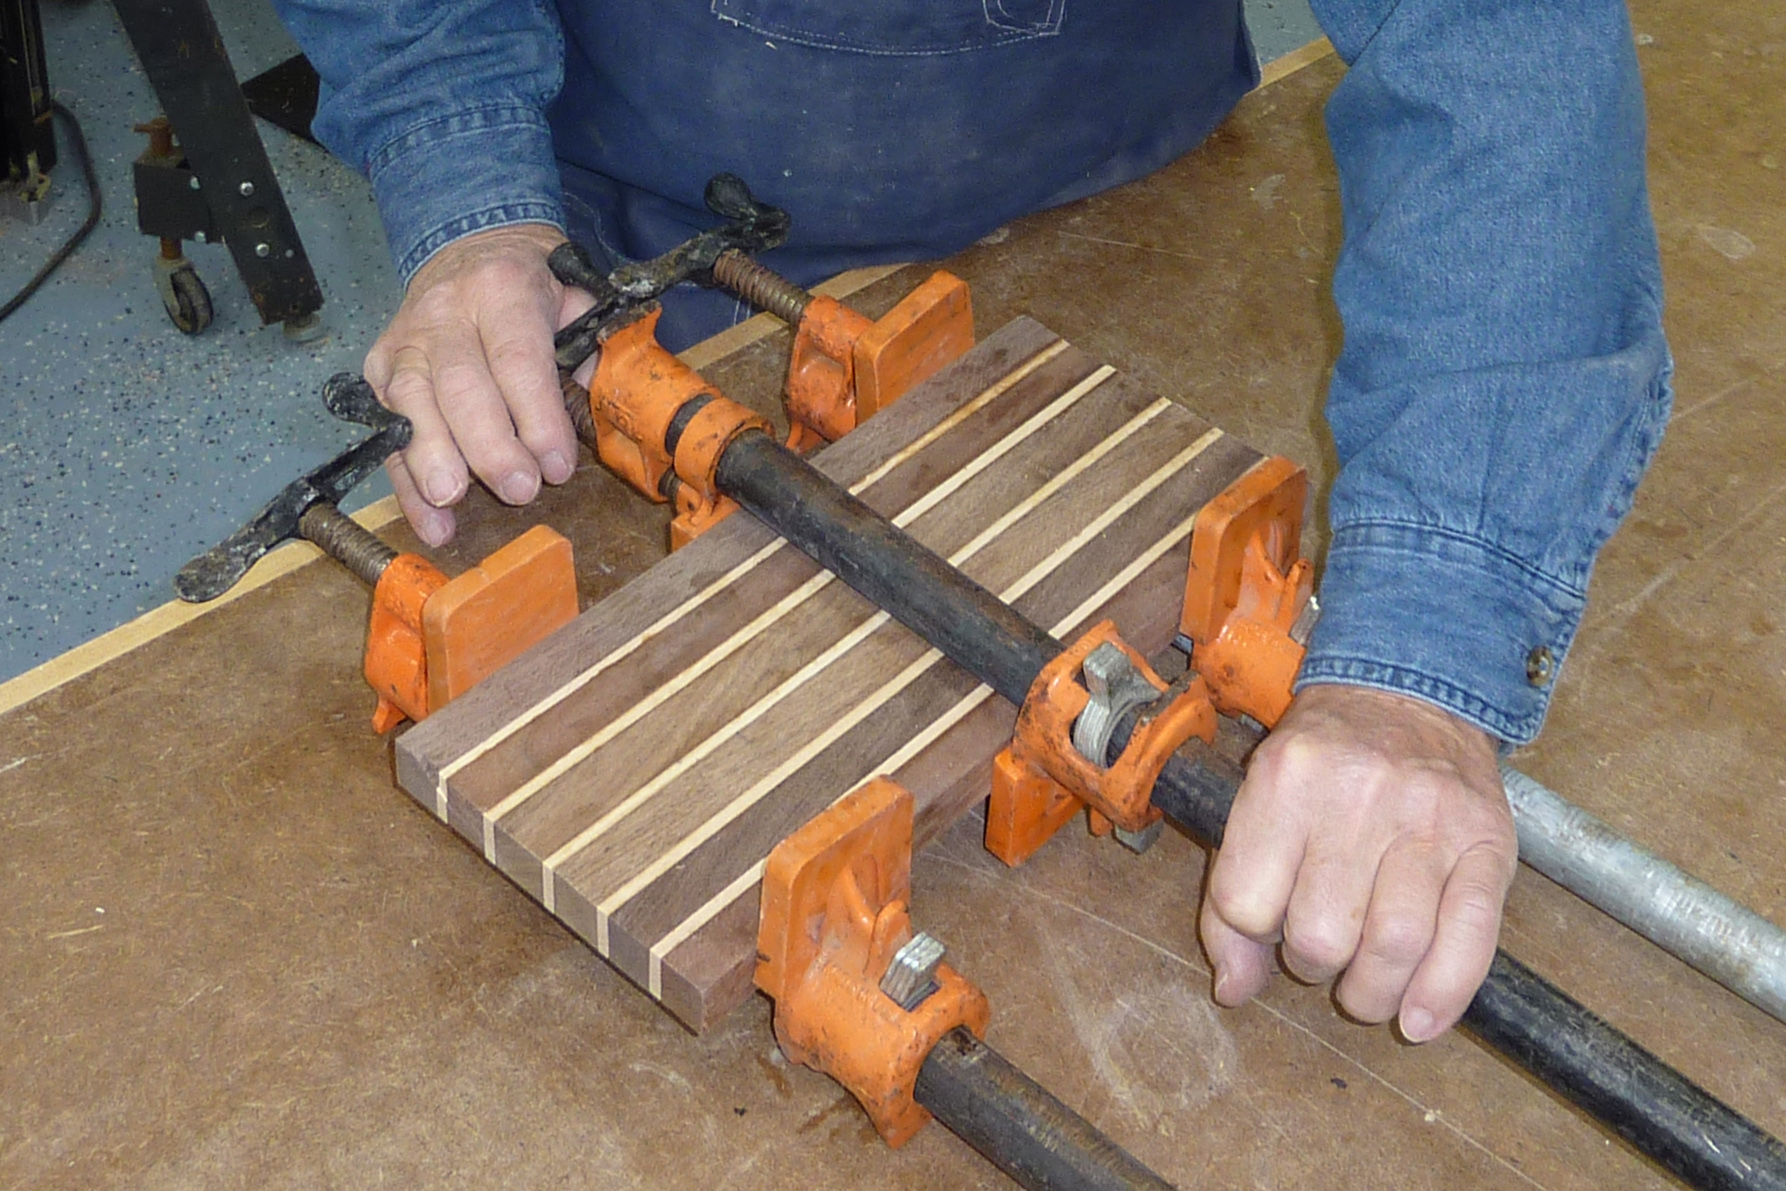 clamping glued wood together